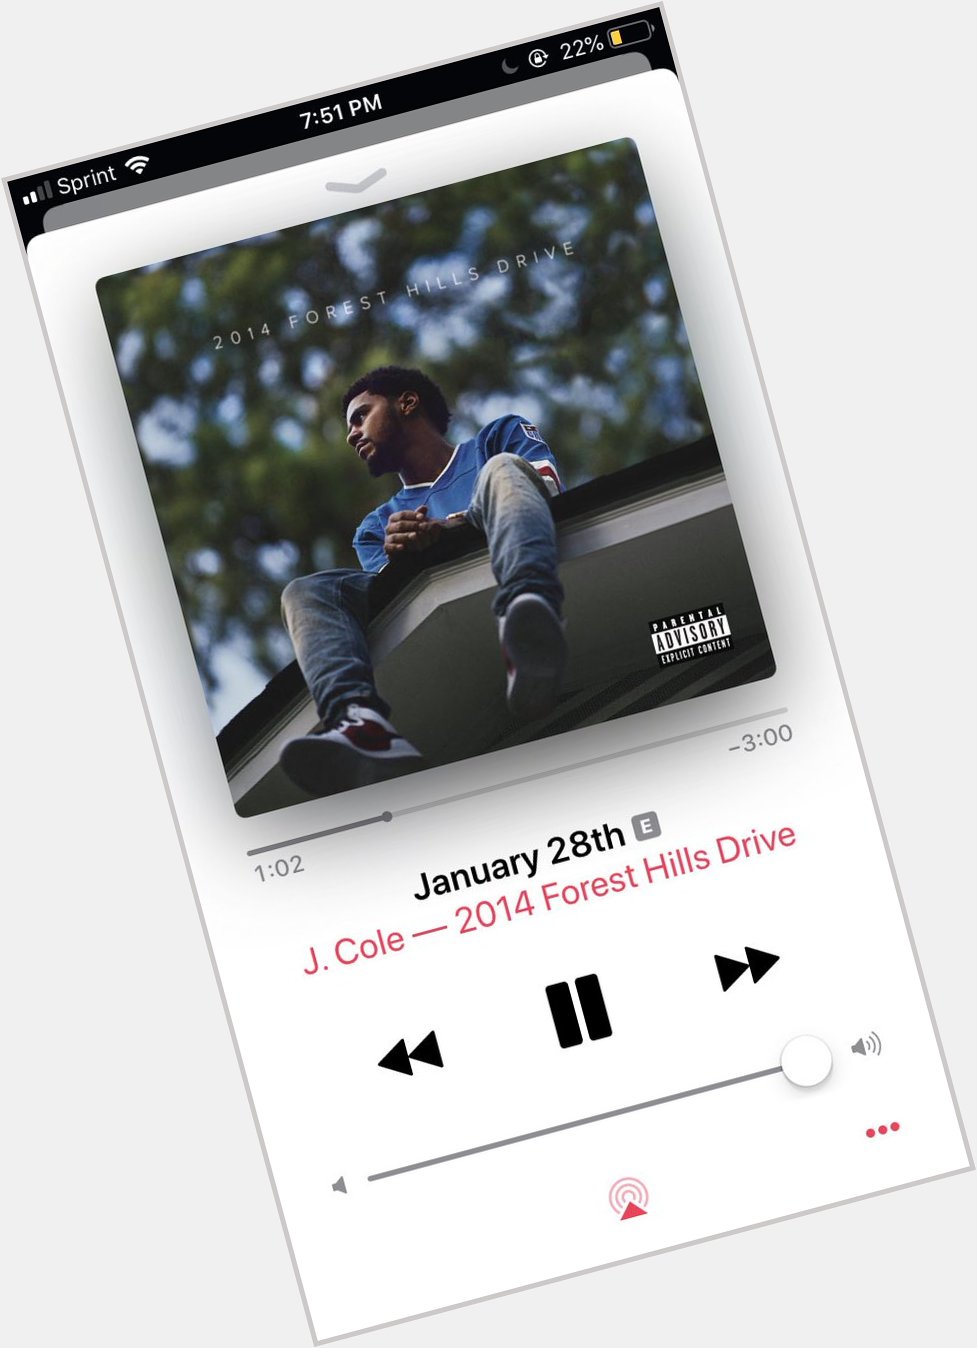 As corny as it sounds j cole changed my life for real happy birthday to the goat 